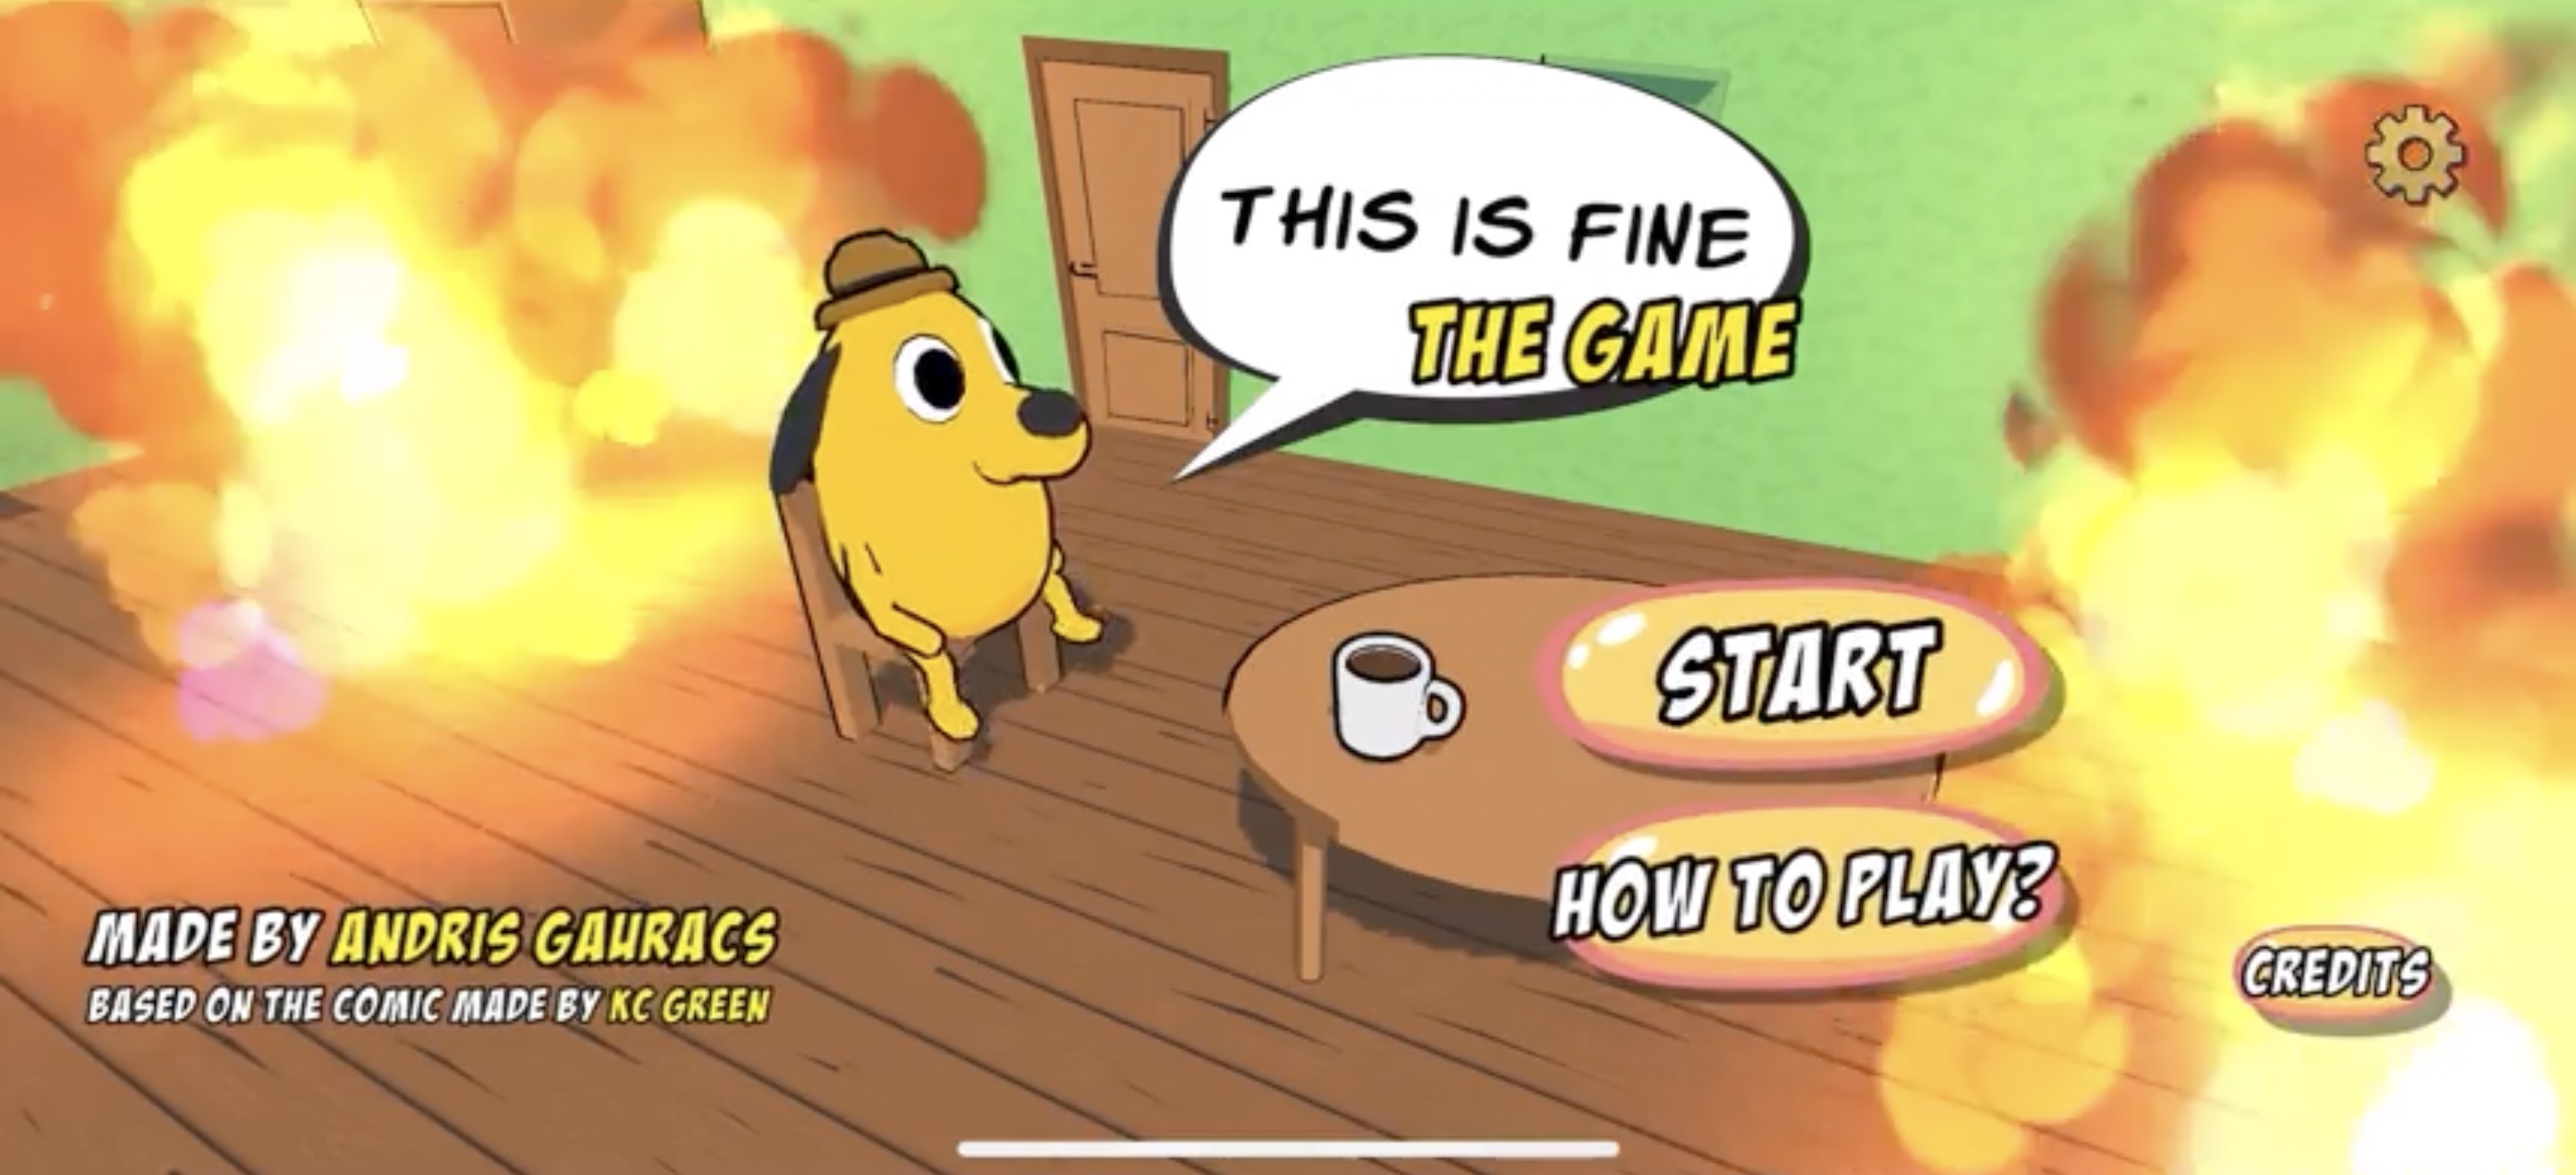 The 'this is fine' meme is now a delightfully chaotic game